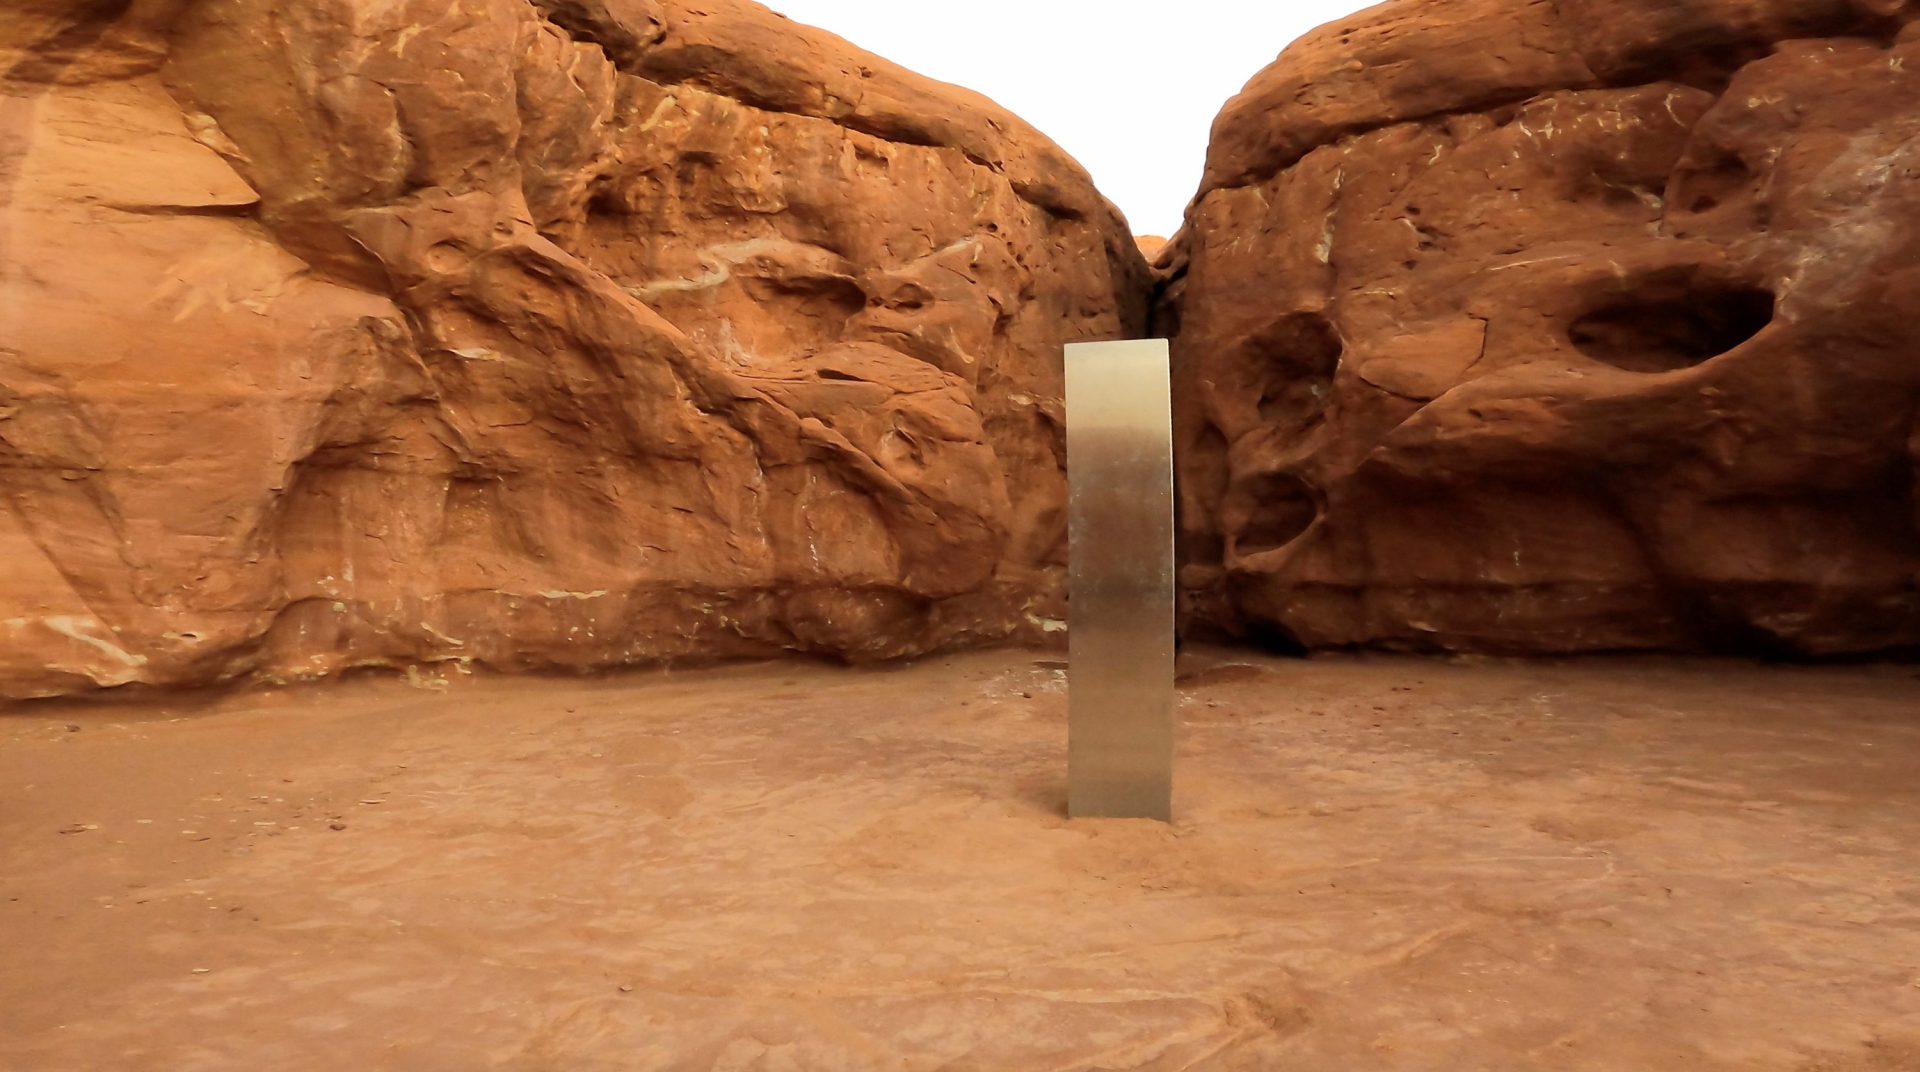 THE MYSTERY OF THE SILVER MONOLITH FOUND IN THE UTAH DESERT SOLVED